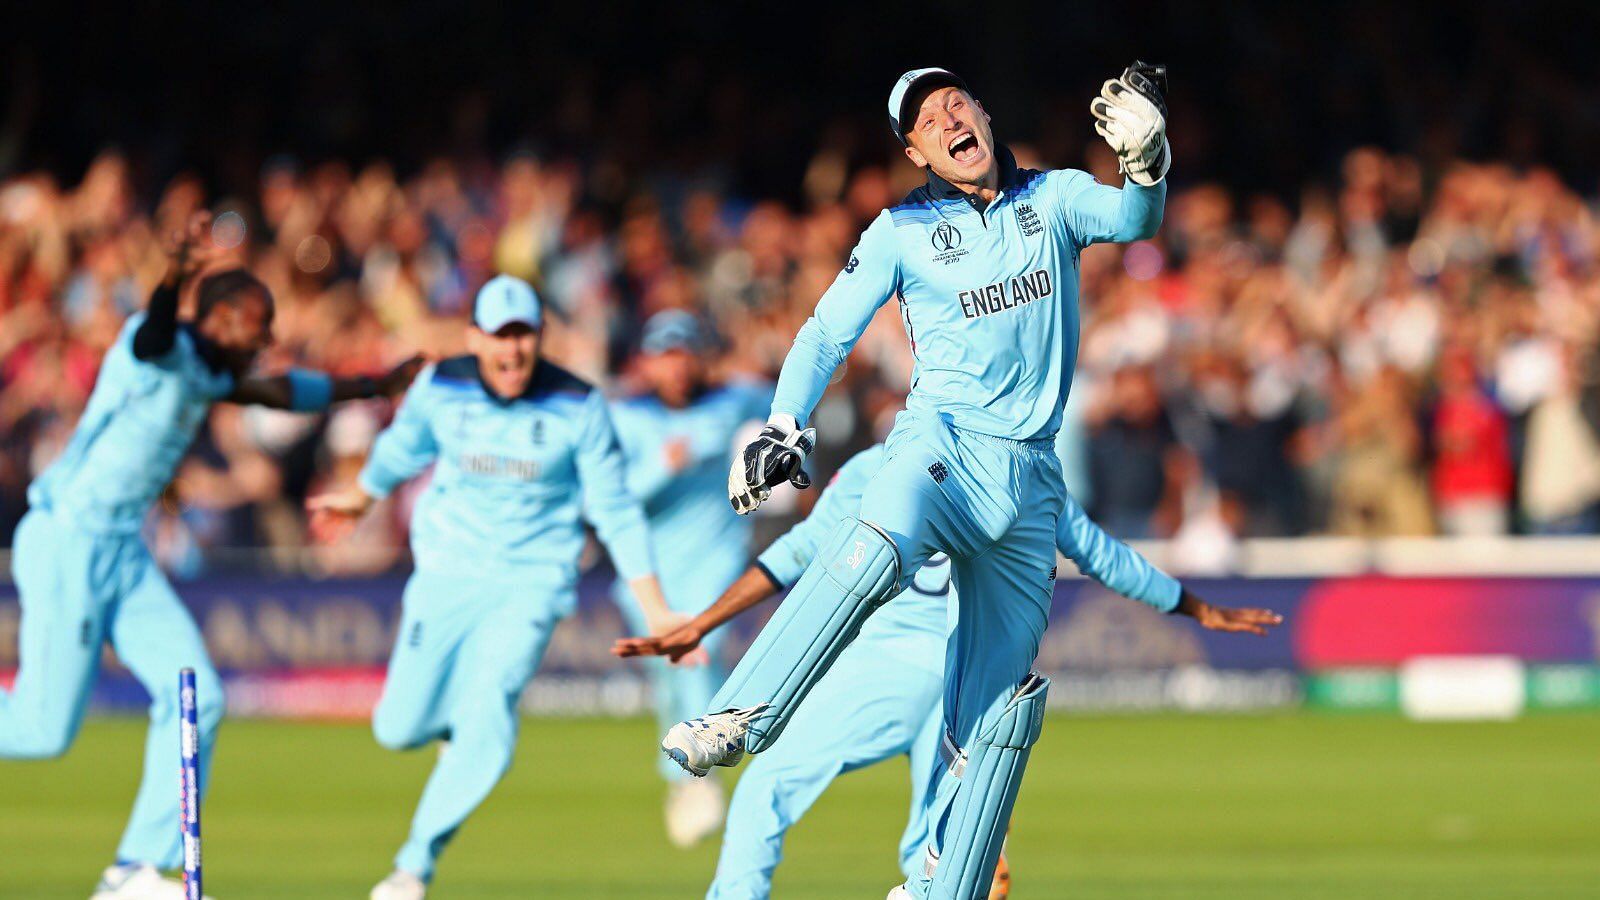 England wicketkeeper Jos Buttler has raised more than 65,000 pound (USD 80,000) to help fight the coronavirus by auctioning off his World Cup final shirt.